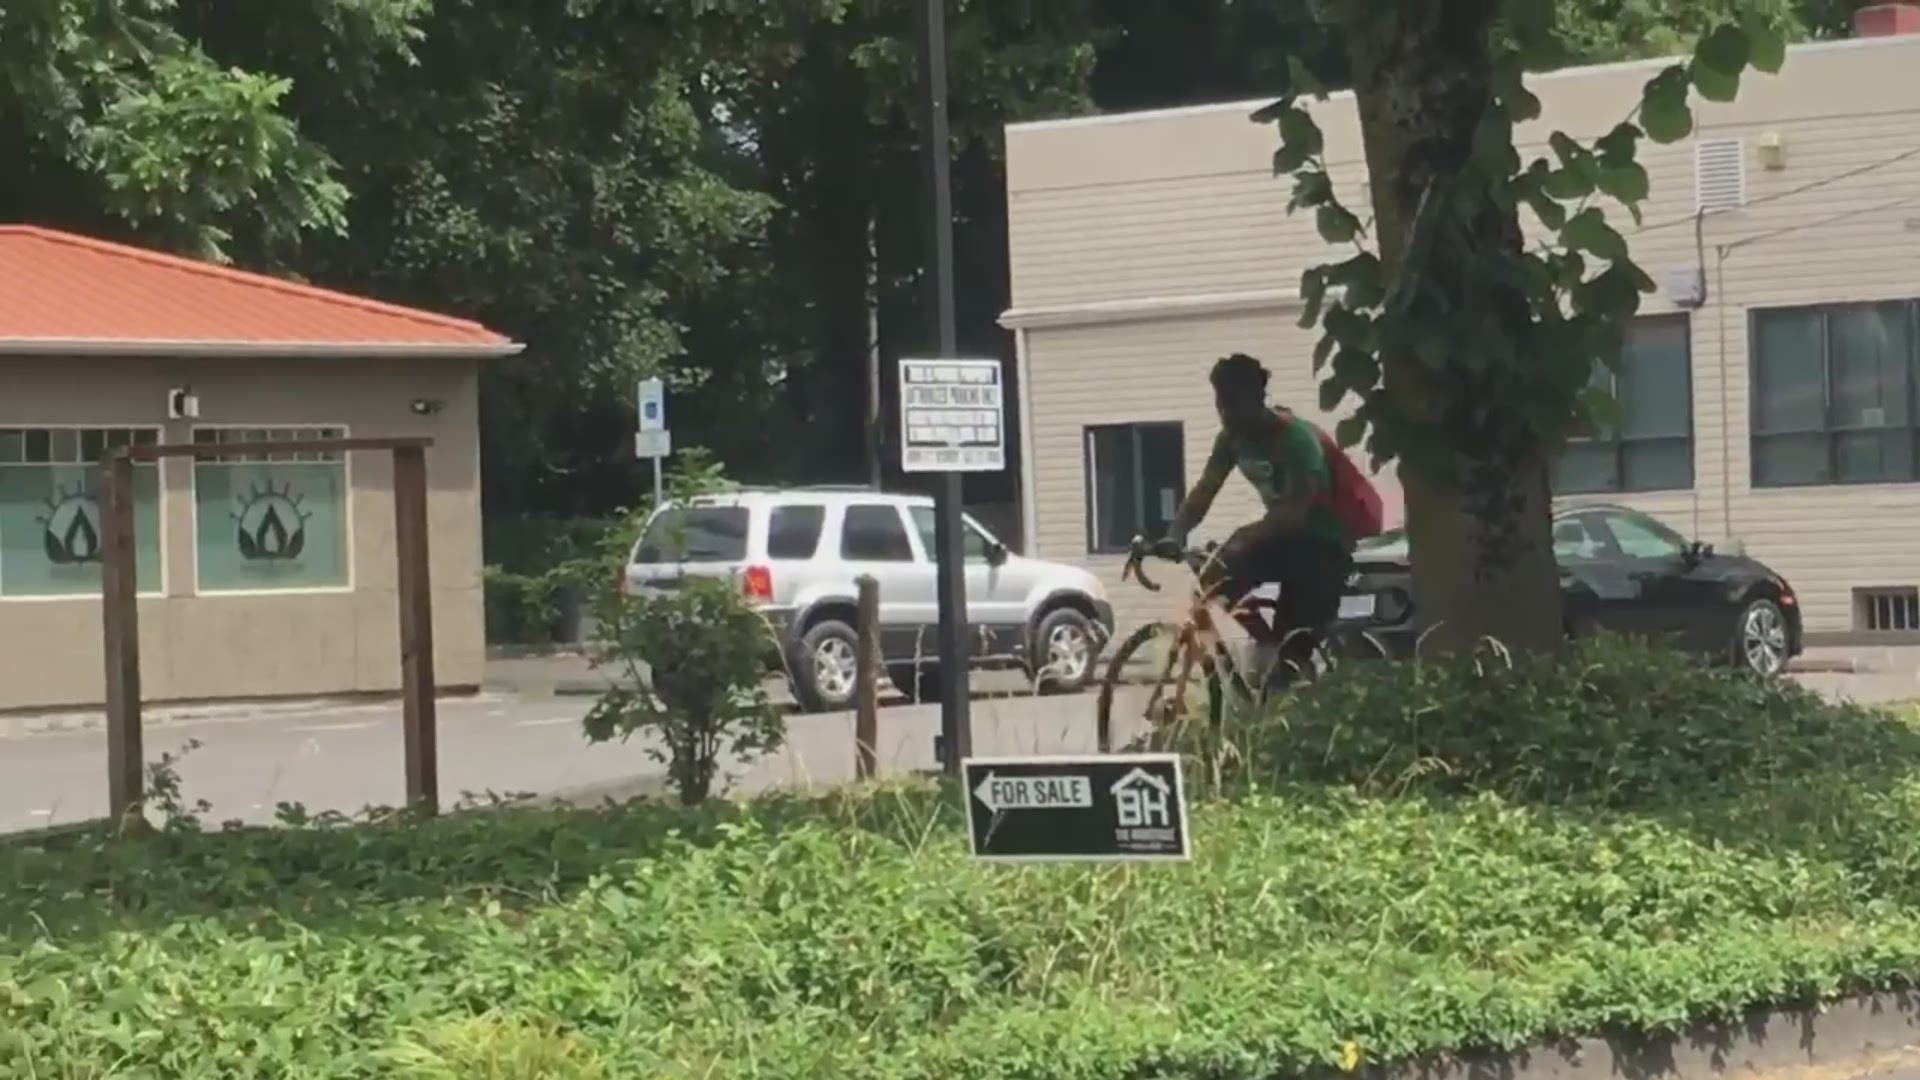 Jay Hamlin, who was attacked and had his bike stolen, received this video and said he recognized the man riding his stolen bike as the suspect who attacked him.